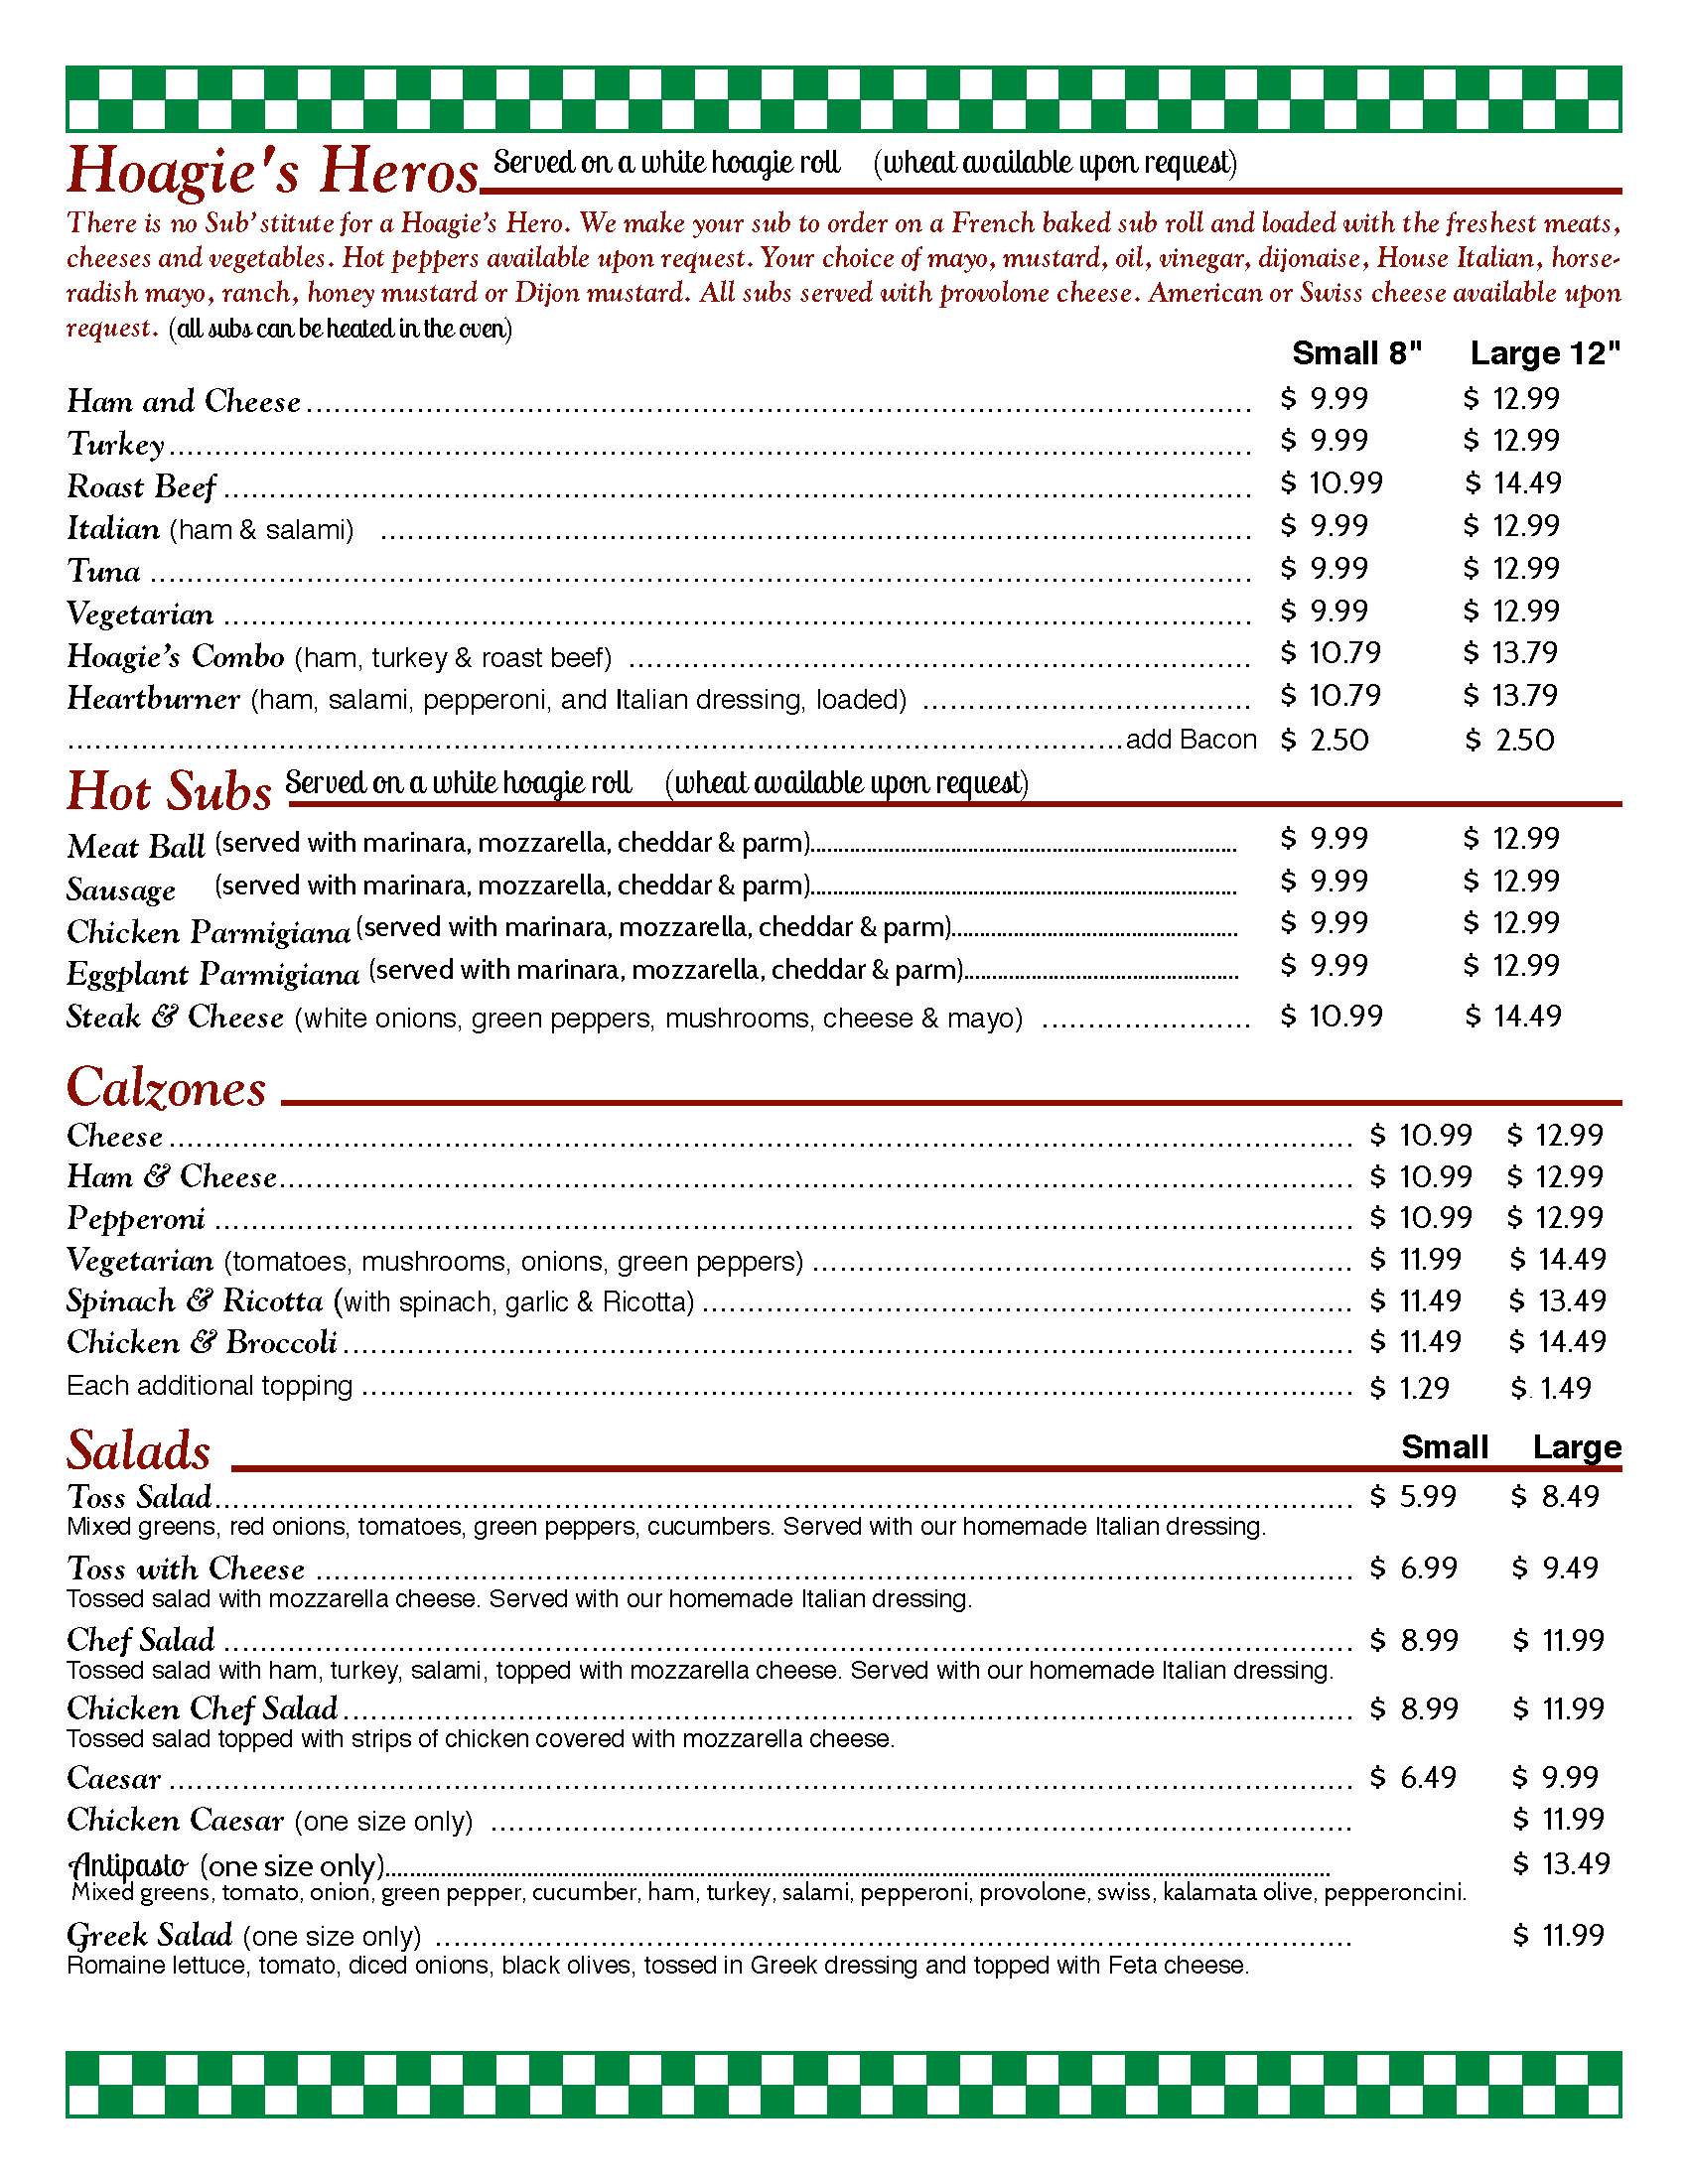 Hoagie's pizza and pasta menu page 4